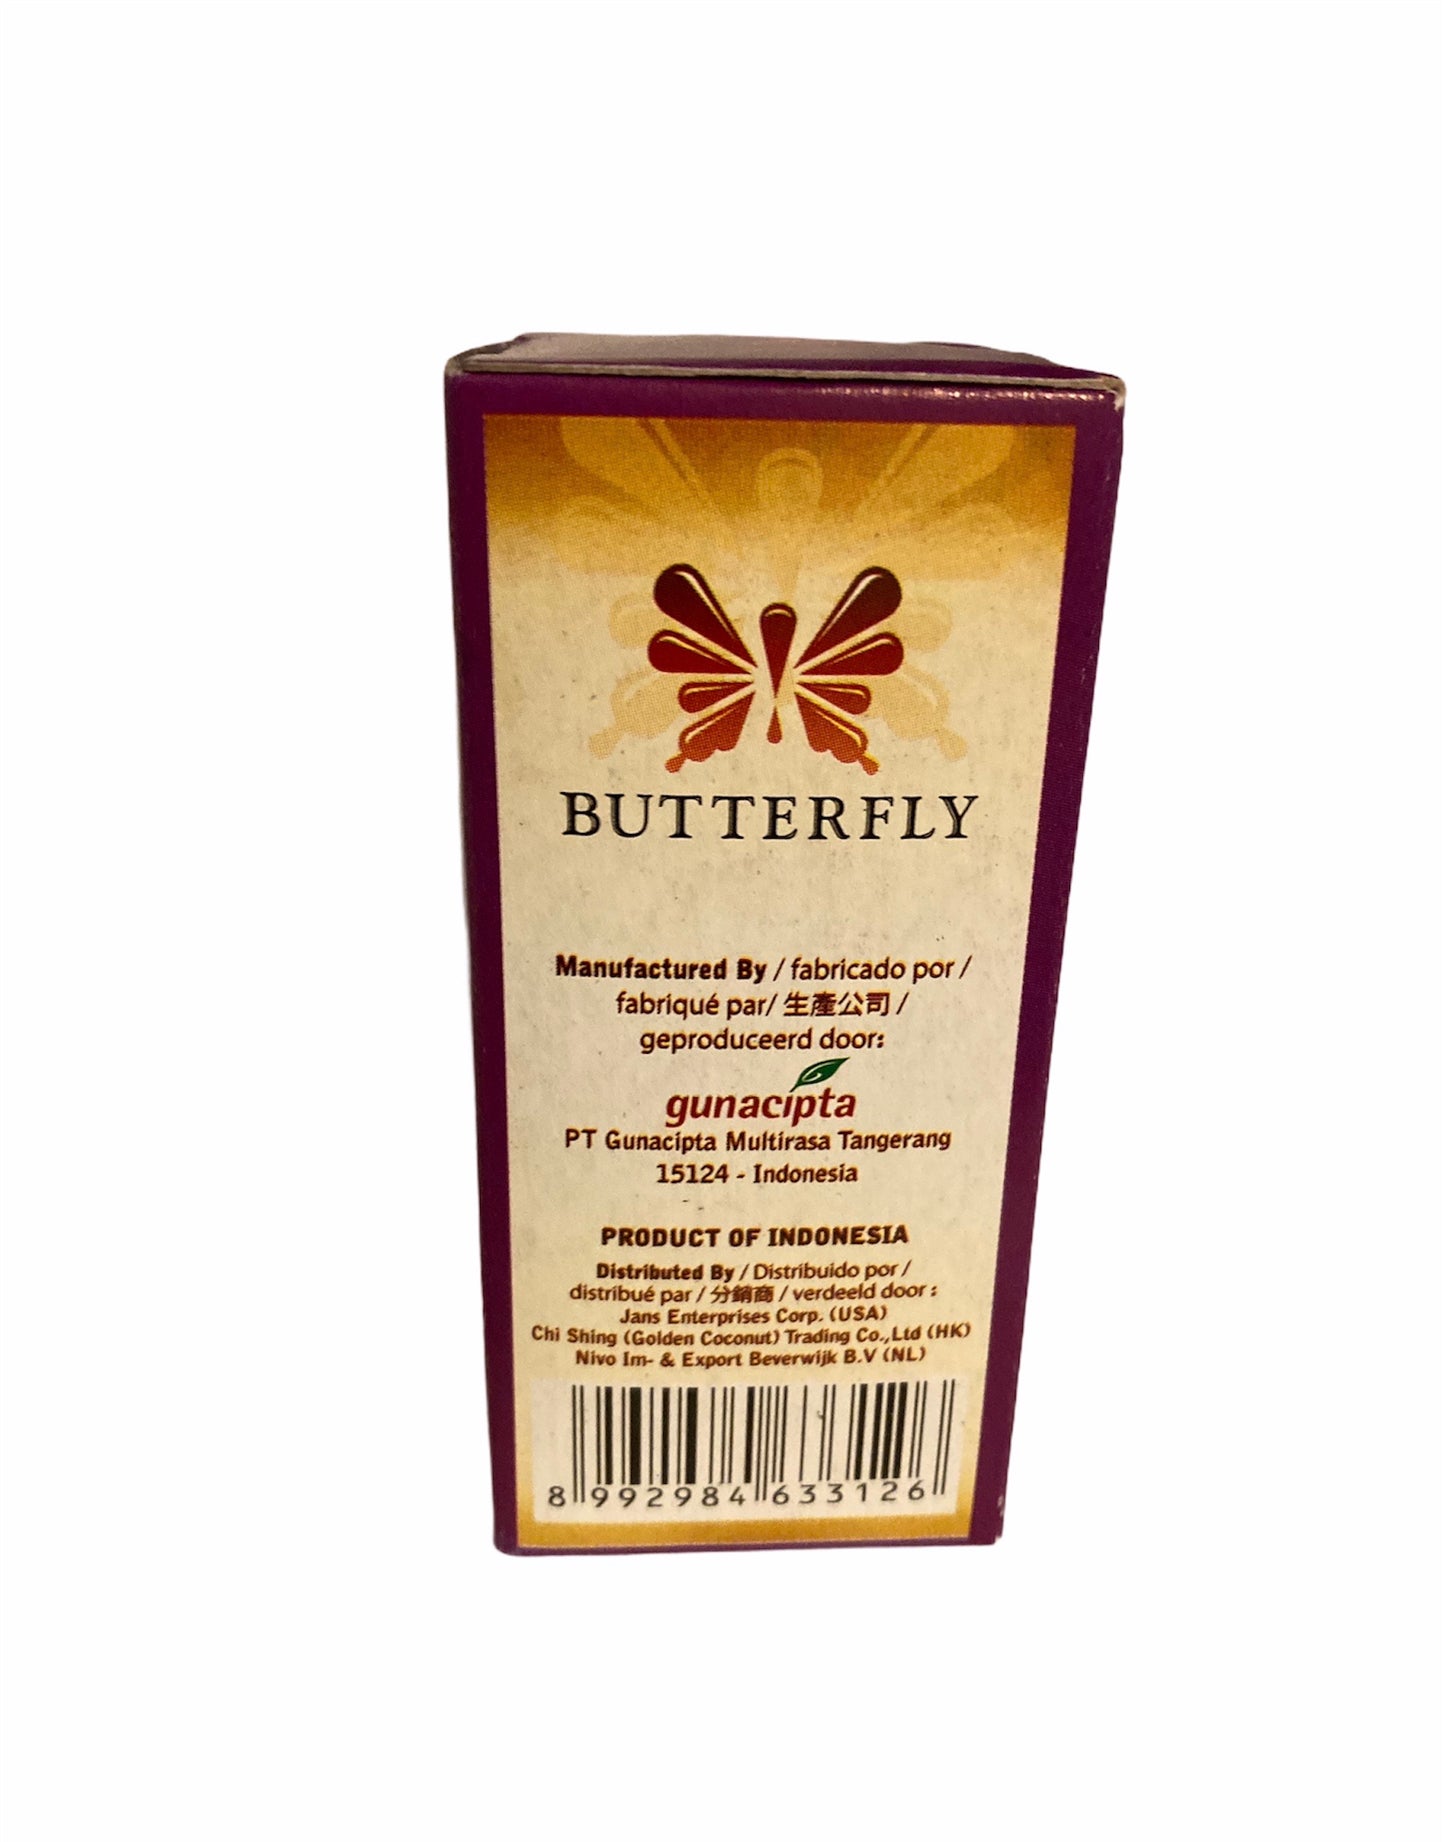 Butterfly Ube Flavoring Extract 2 Oz. (60 ml)